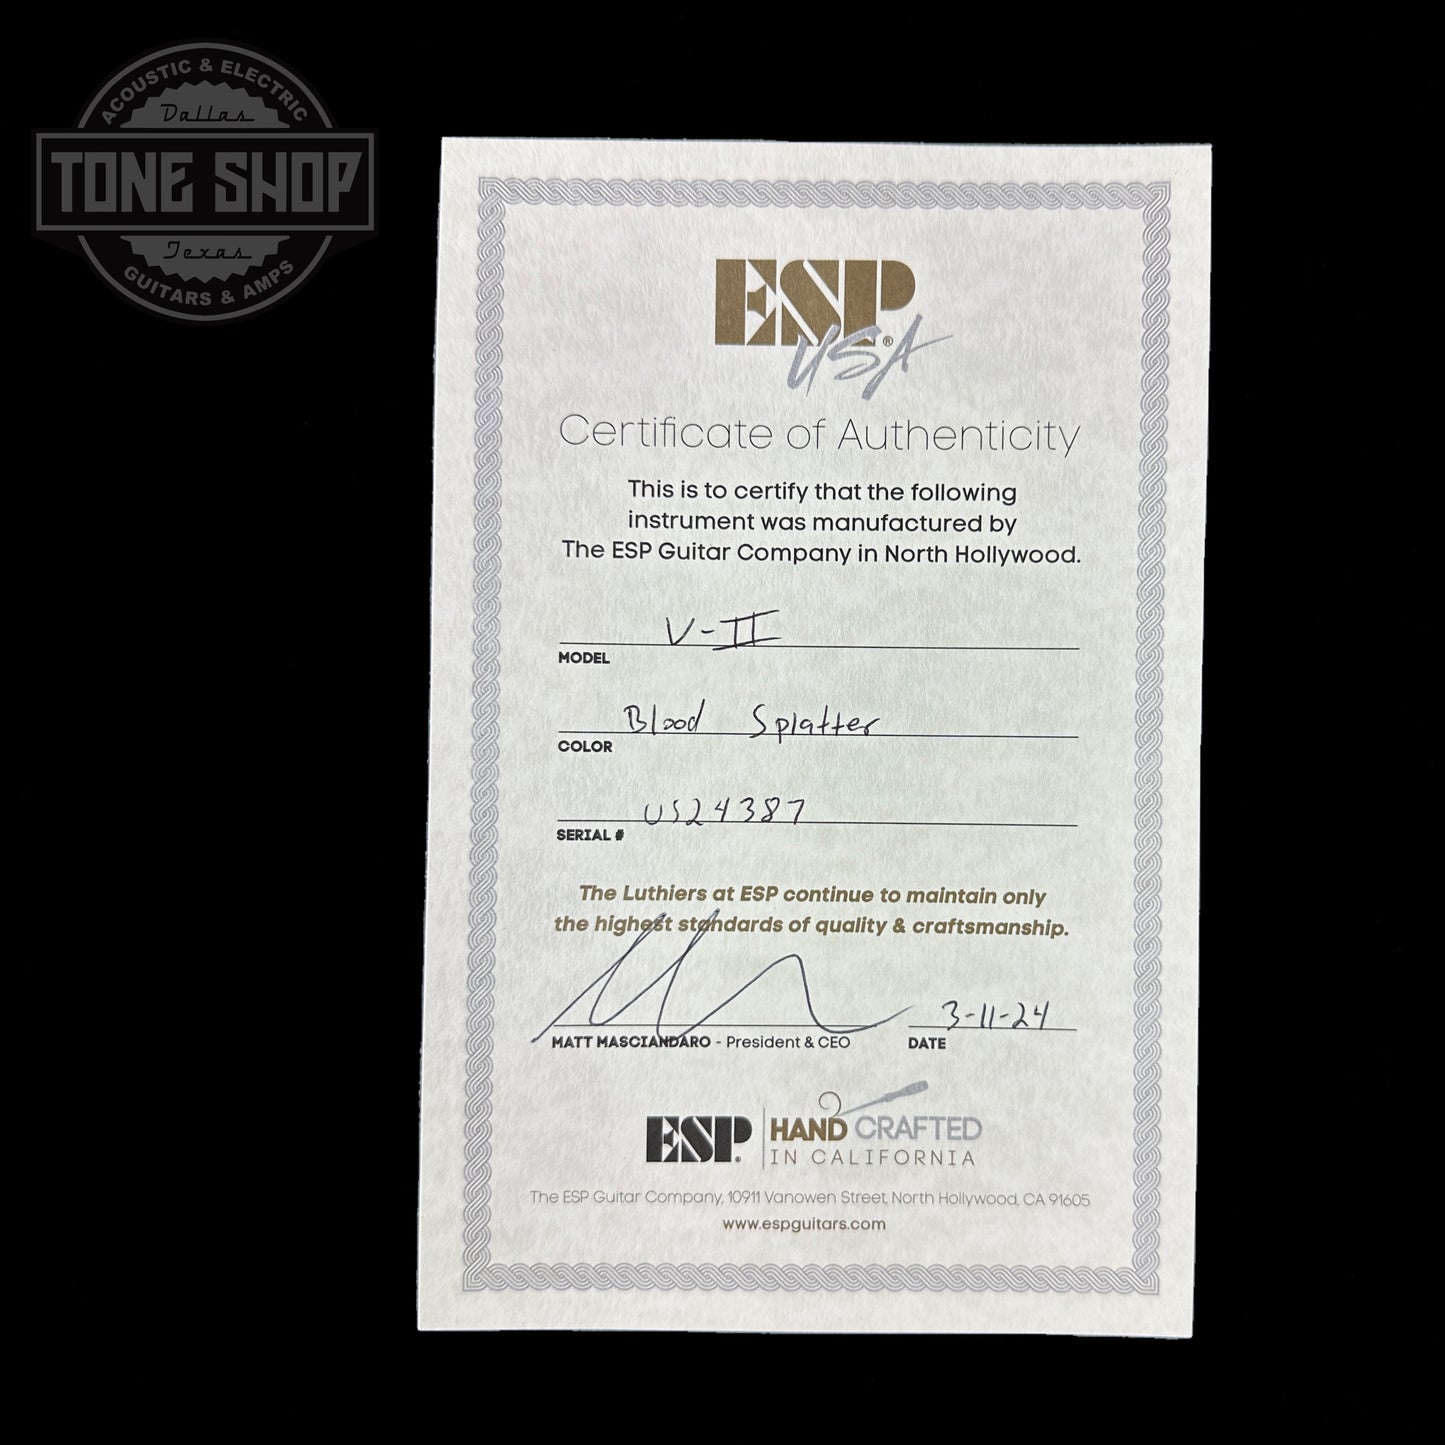 Certificate of authenticity for ESP USA V-II NT Blood Splatter.